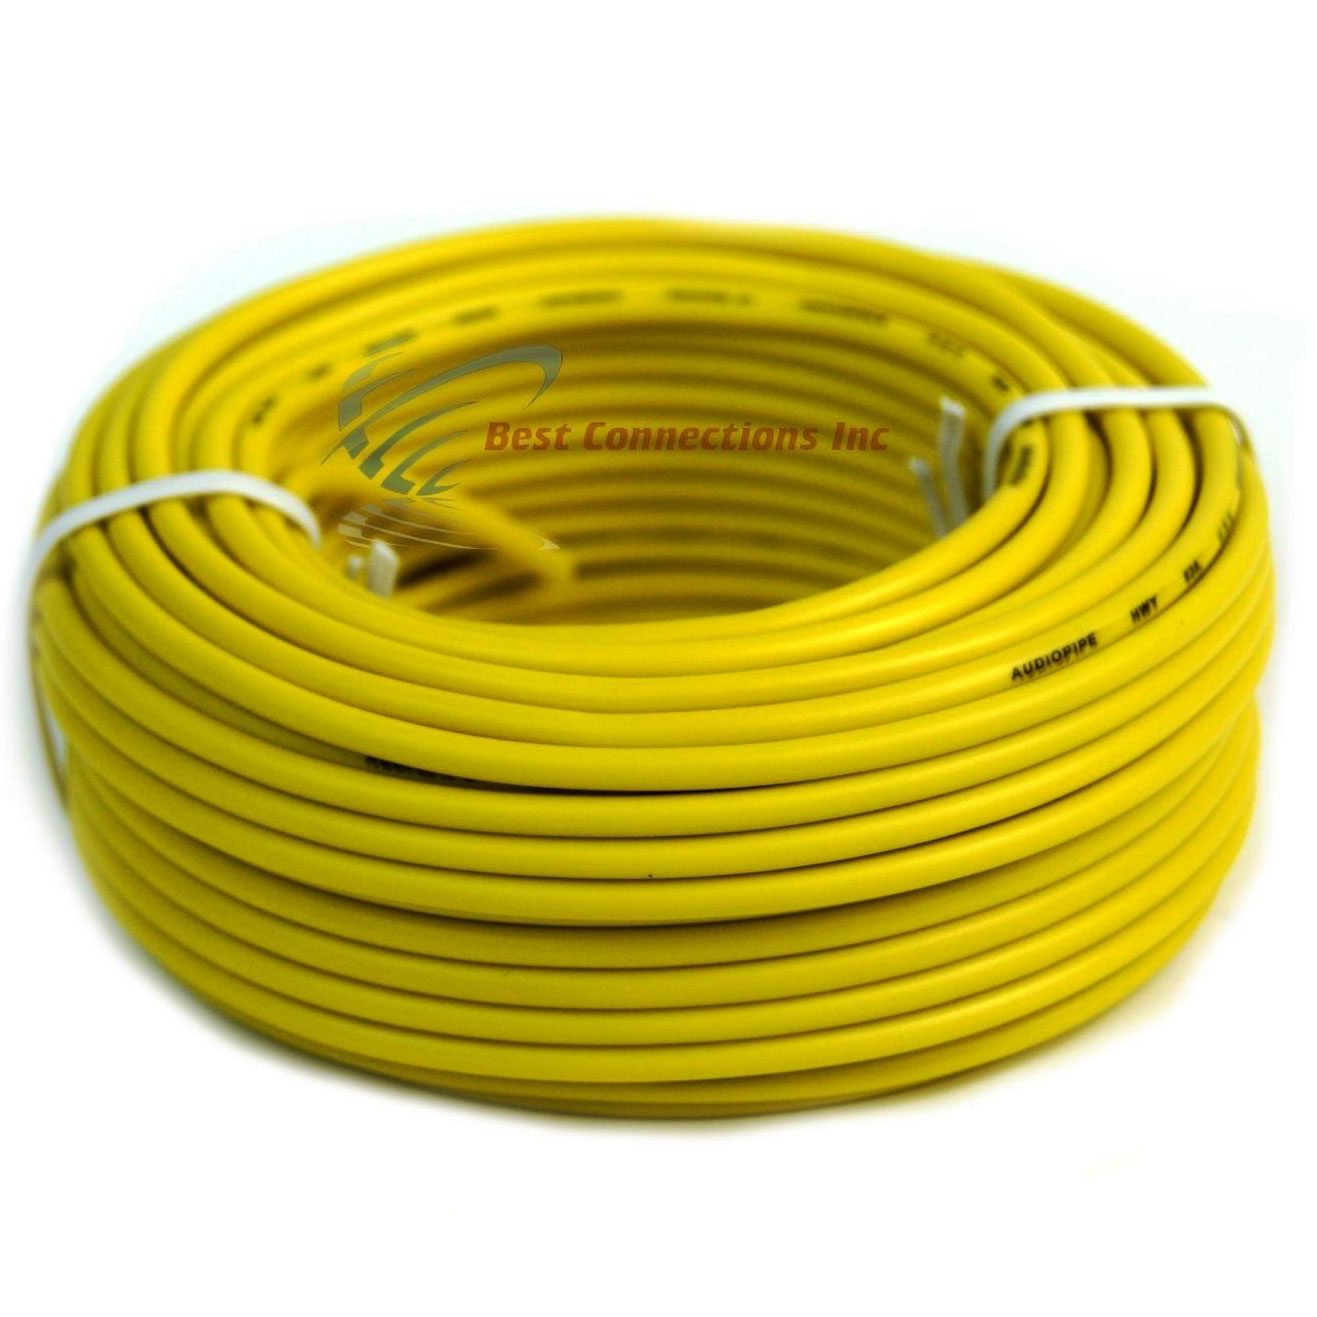 18 GA Gauge 50' Feet Yellow Audiopipe Car Audio Home Remote Primary Cable Wire - image 2 of 4